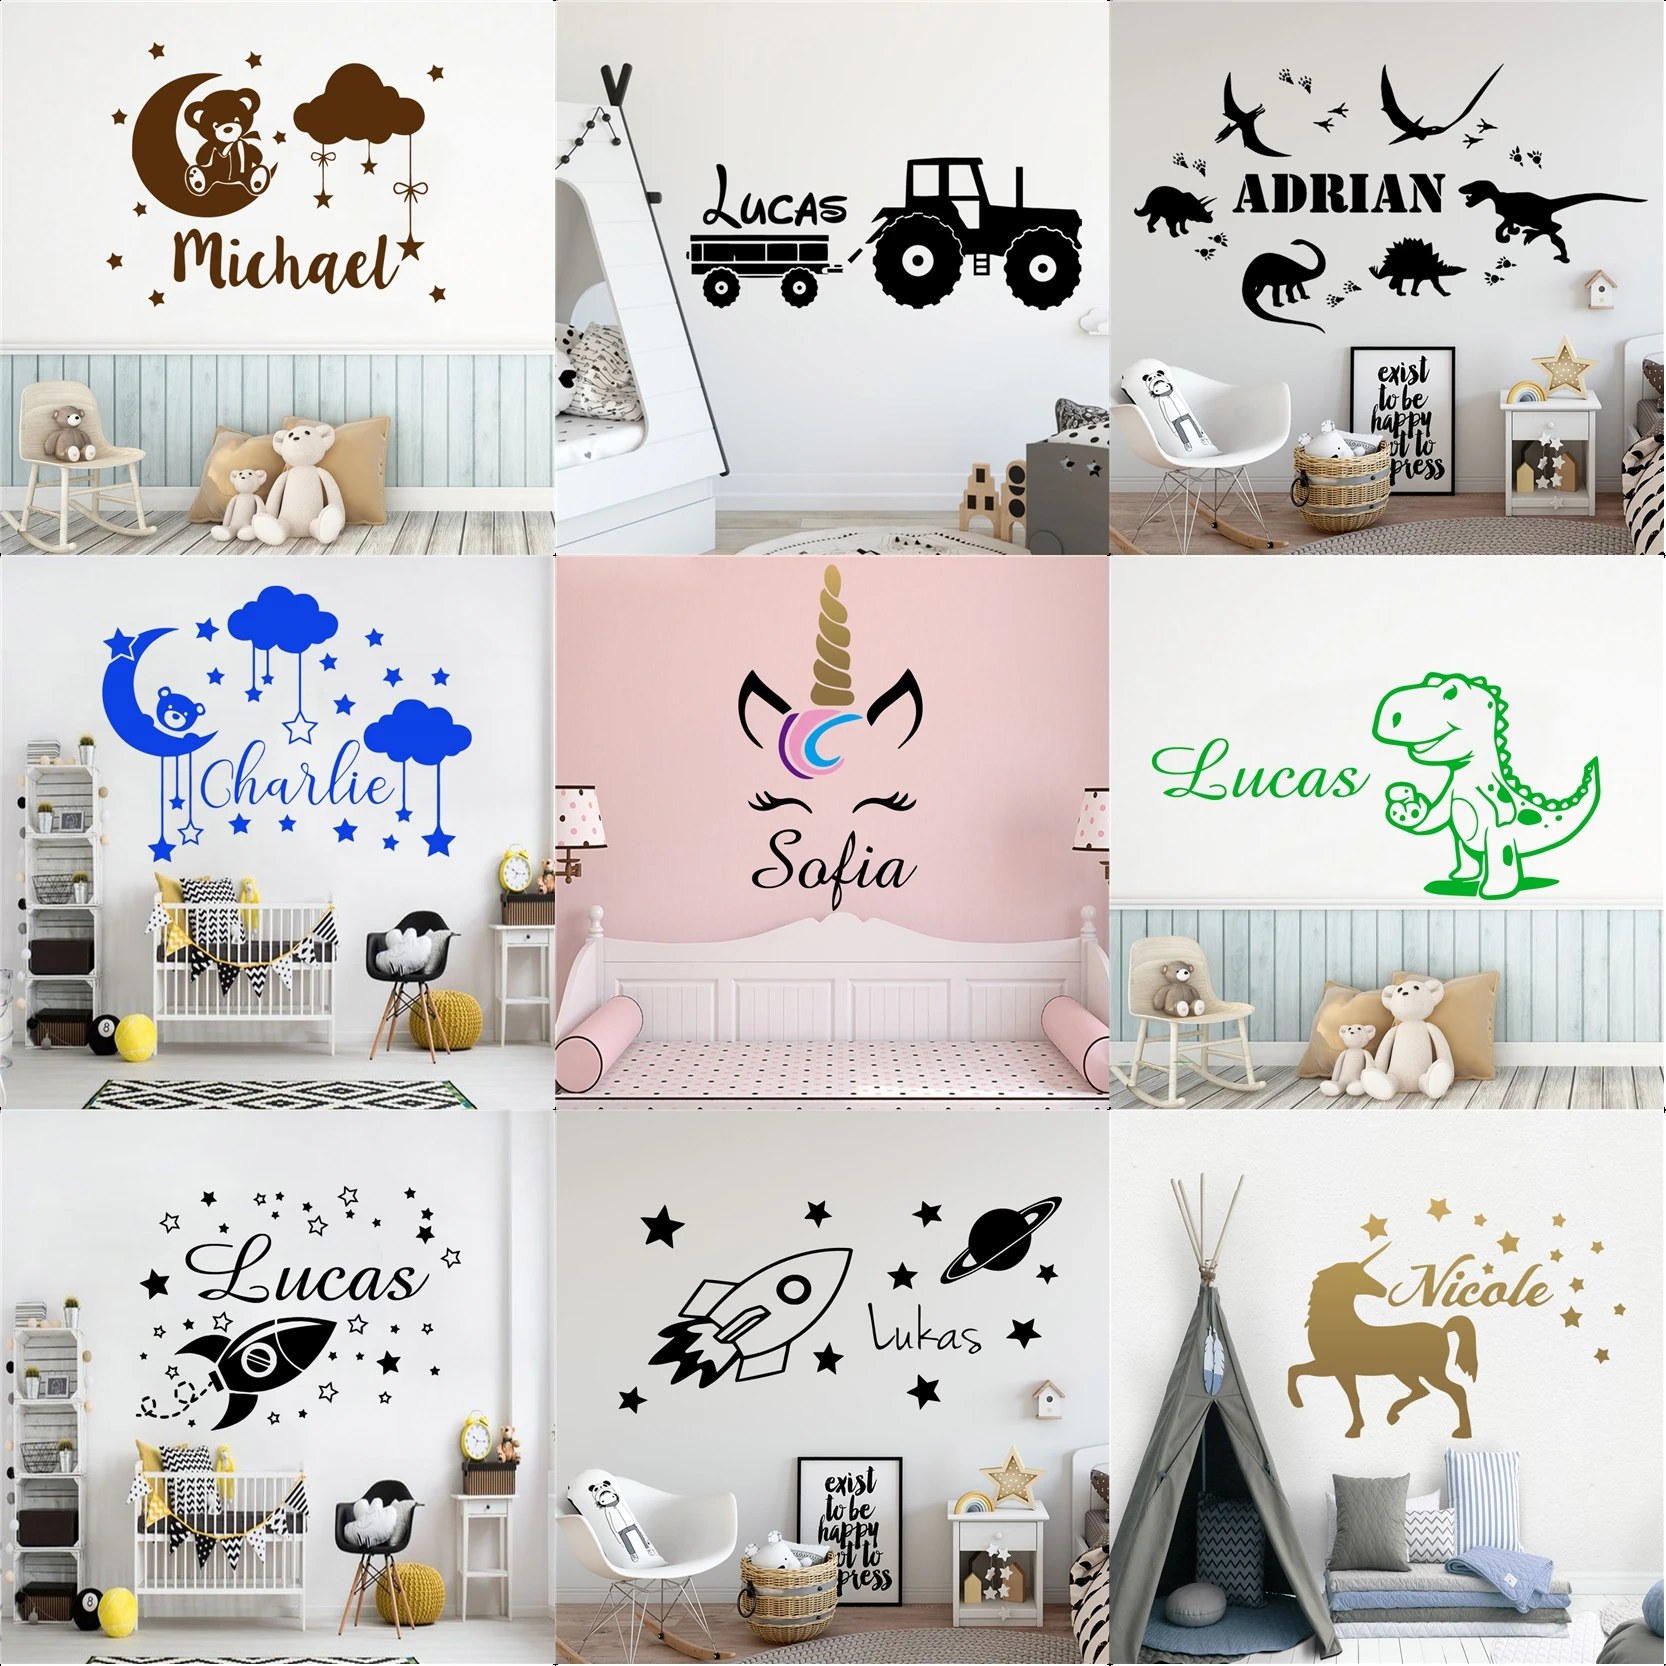 Personalized Custom Name Wall Sticker Vinyl Decals For Babys Kids Room Decoration Bedroom Decor Wallpaper Stickers Murals